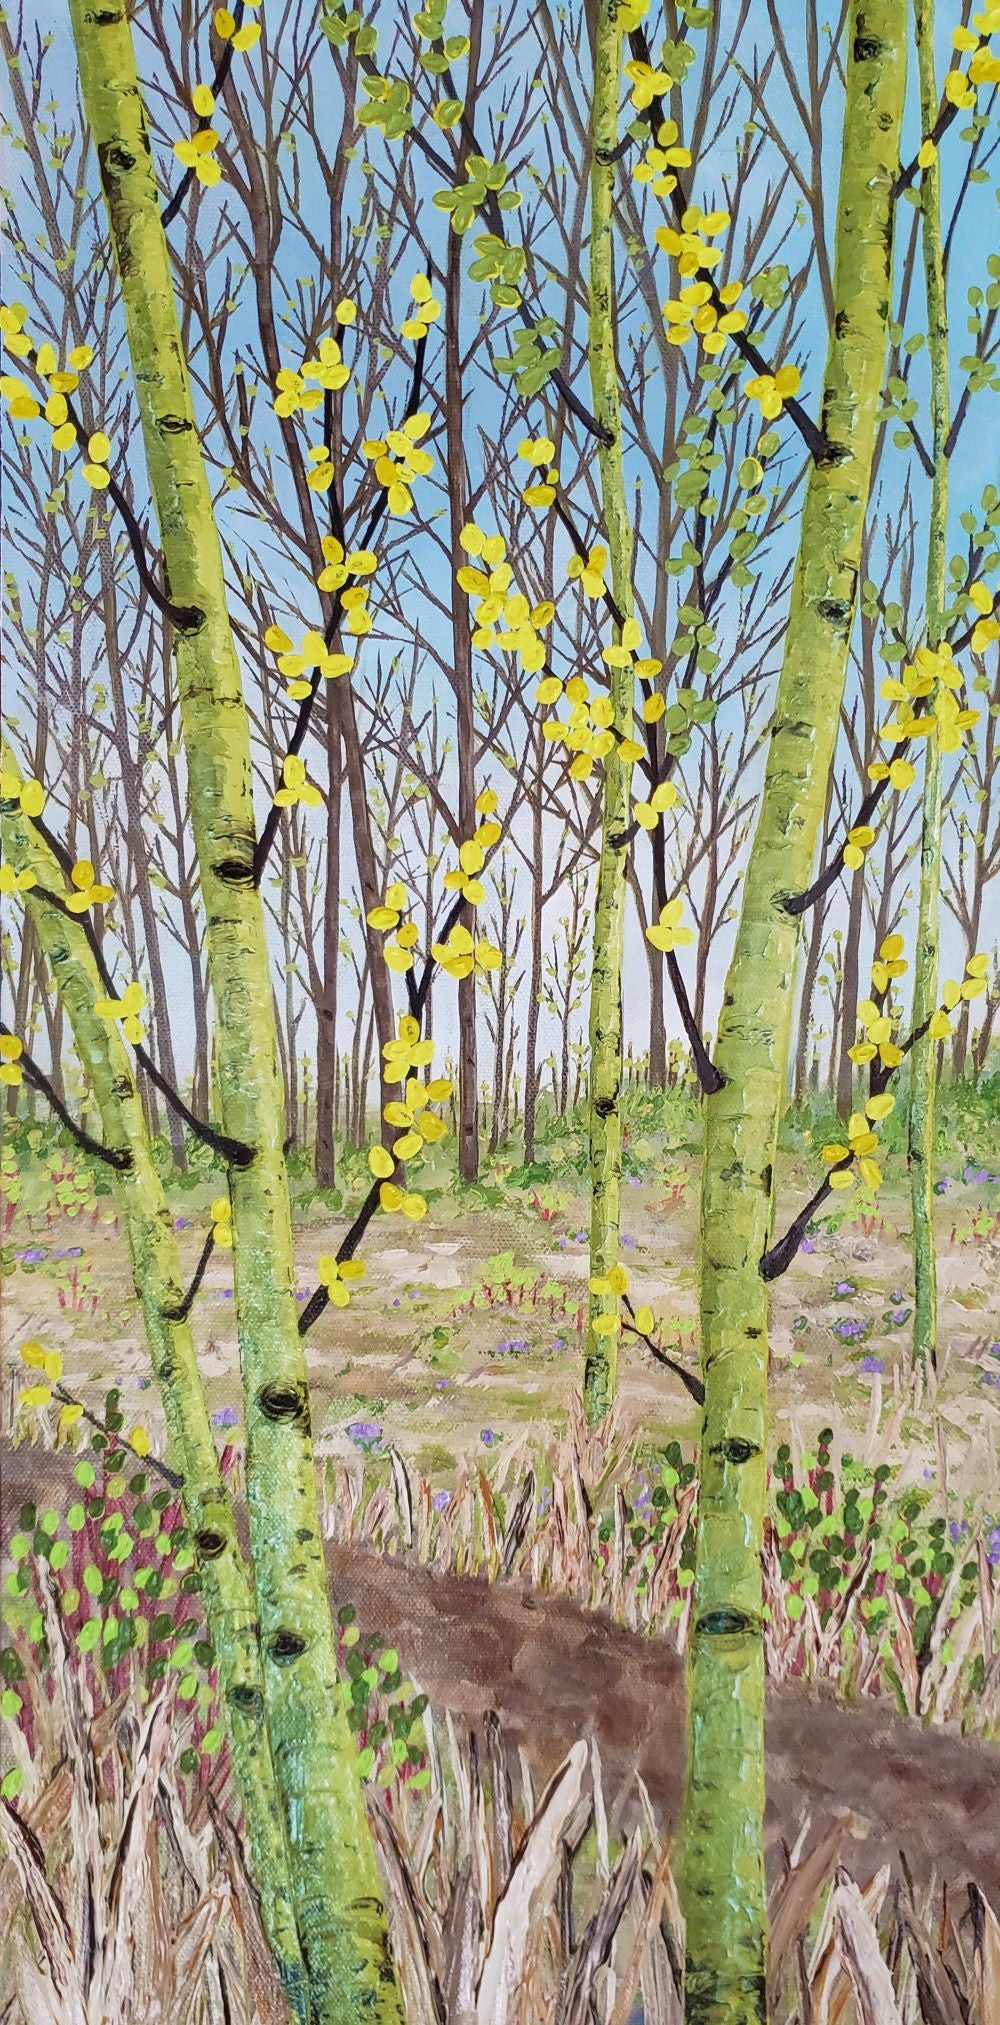 Palette knife painting of green aspen trees in spring  by Jeweliyana Reece